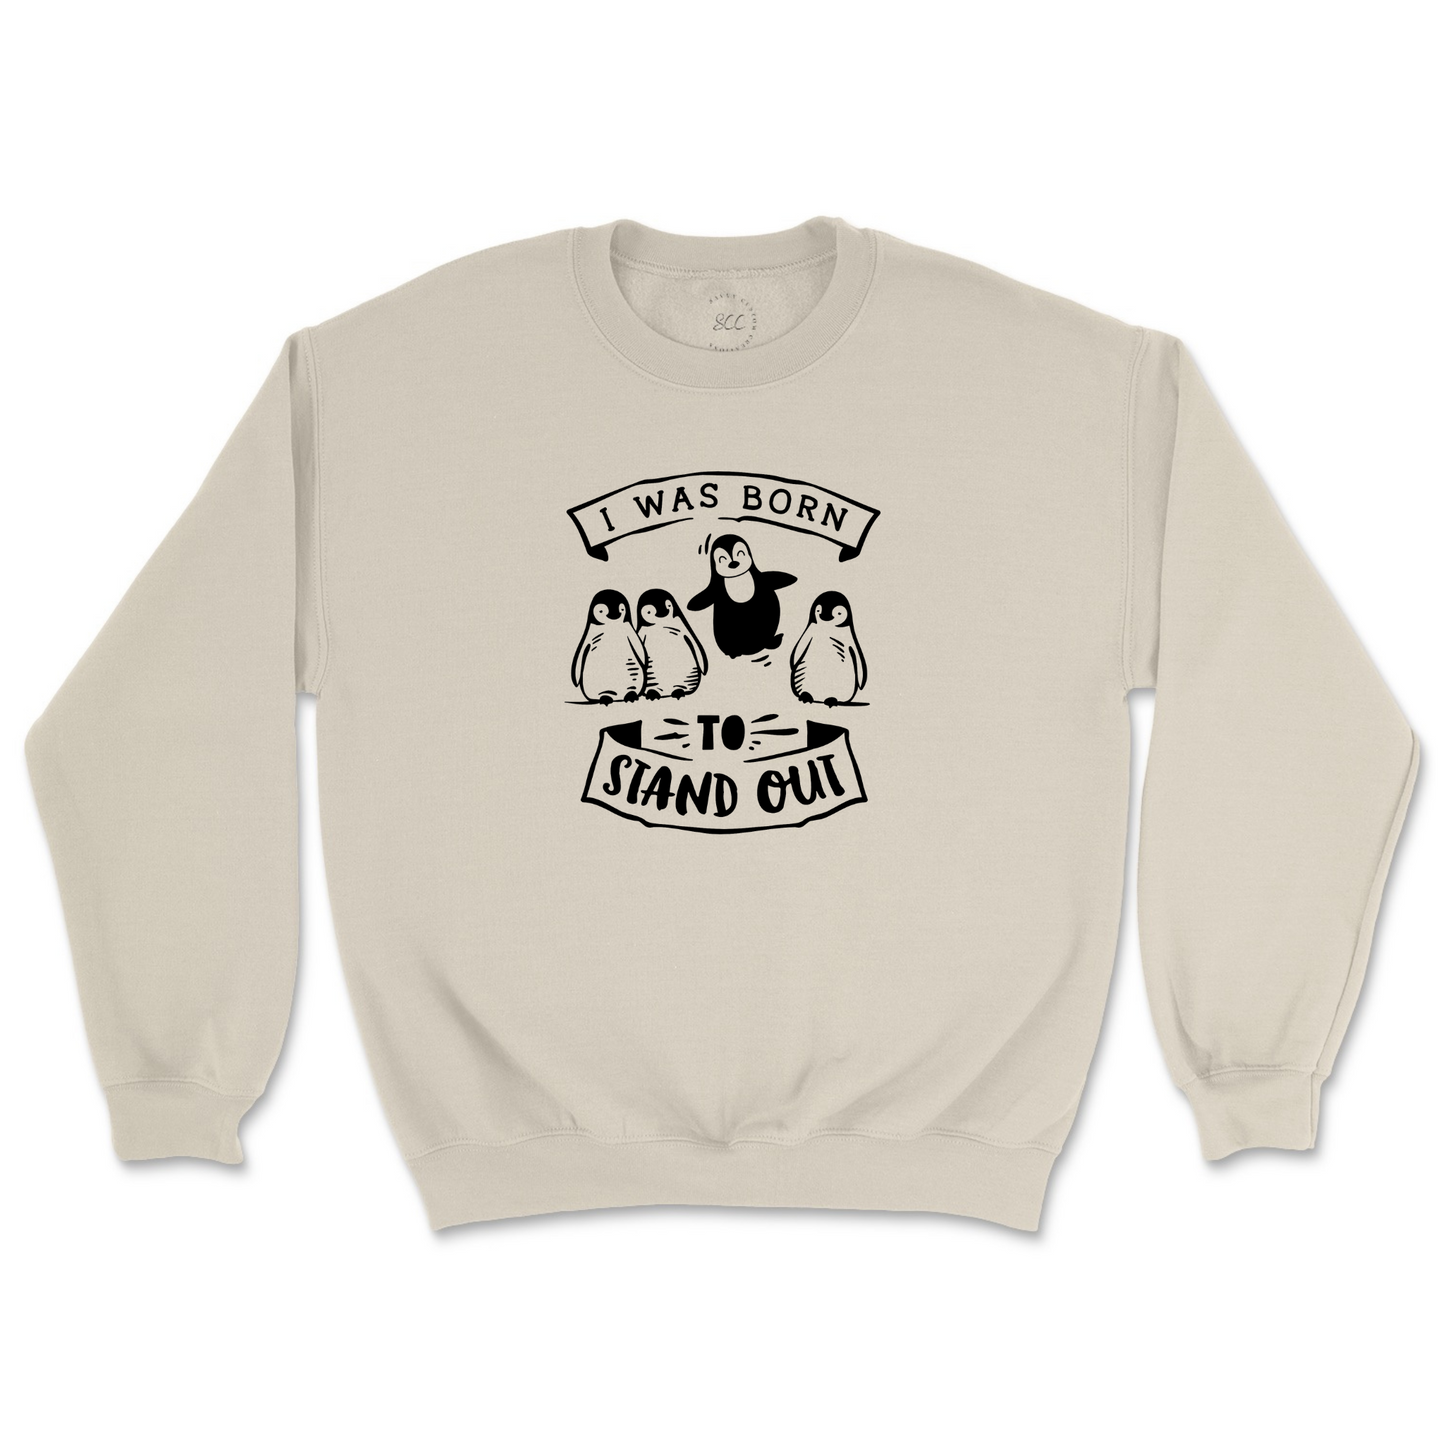 I WAS BORN TO STAND OUT - Unisex Sweatshirt